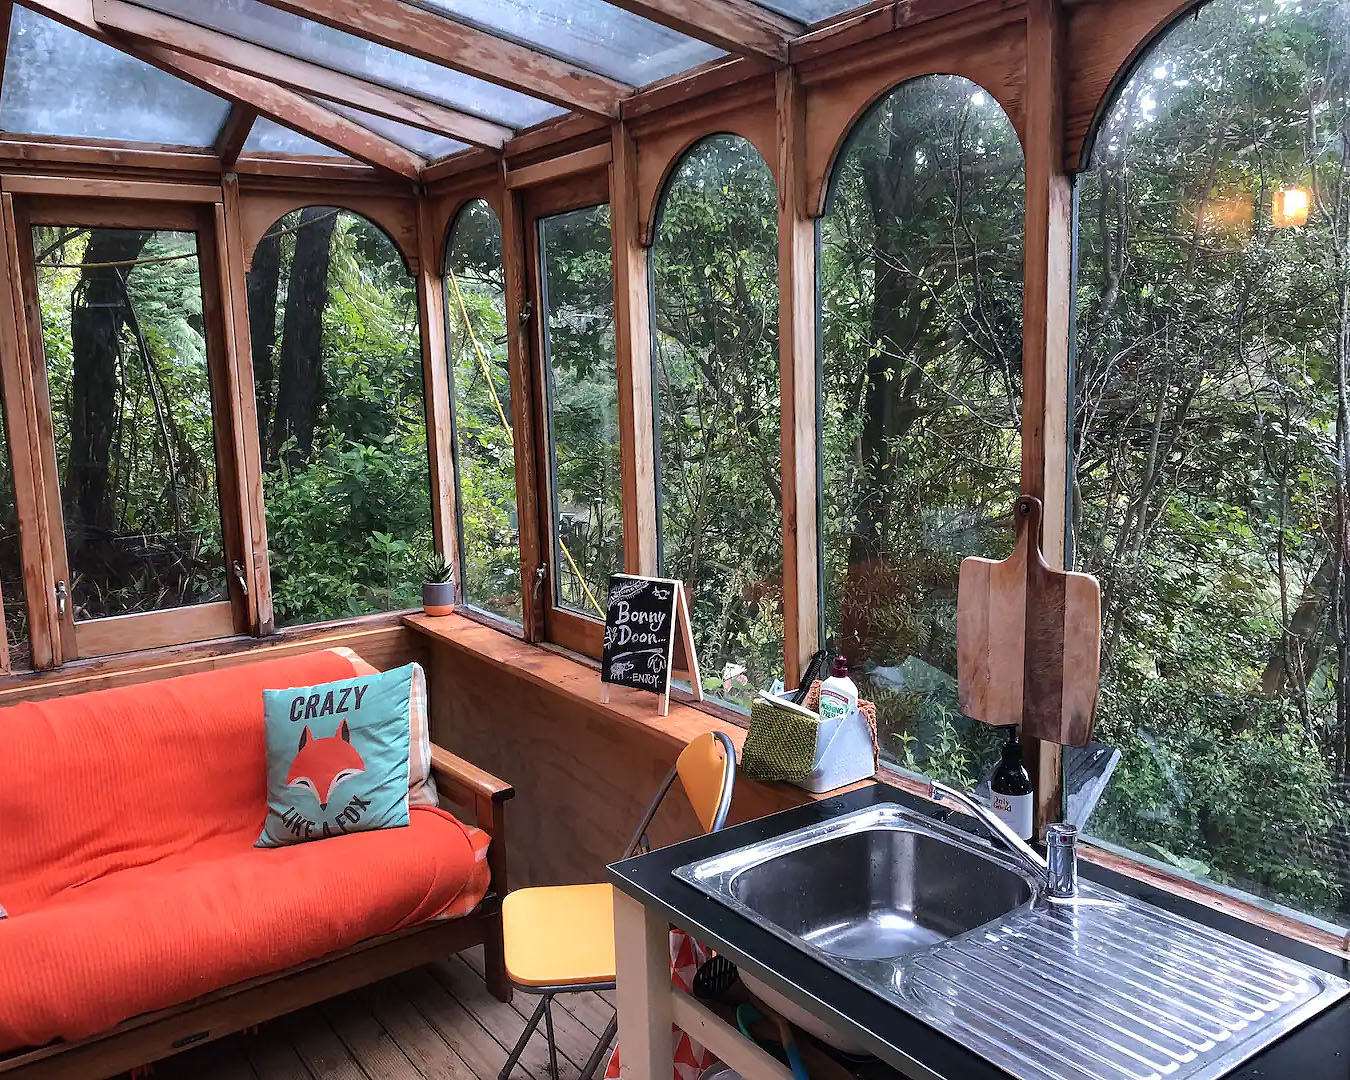 A view of the dense bush from the cozy caravan amongst the trees, one of the best pet friendly accommodations in New Zealand.